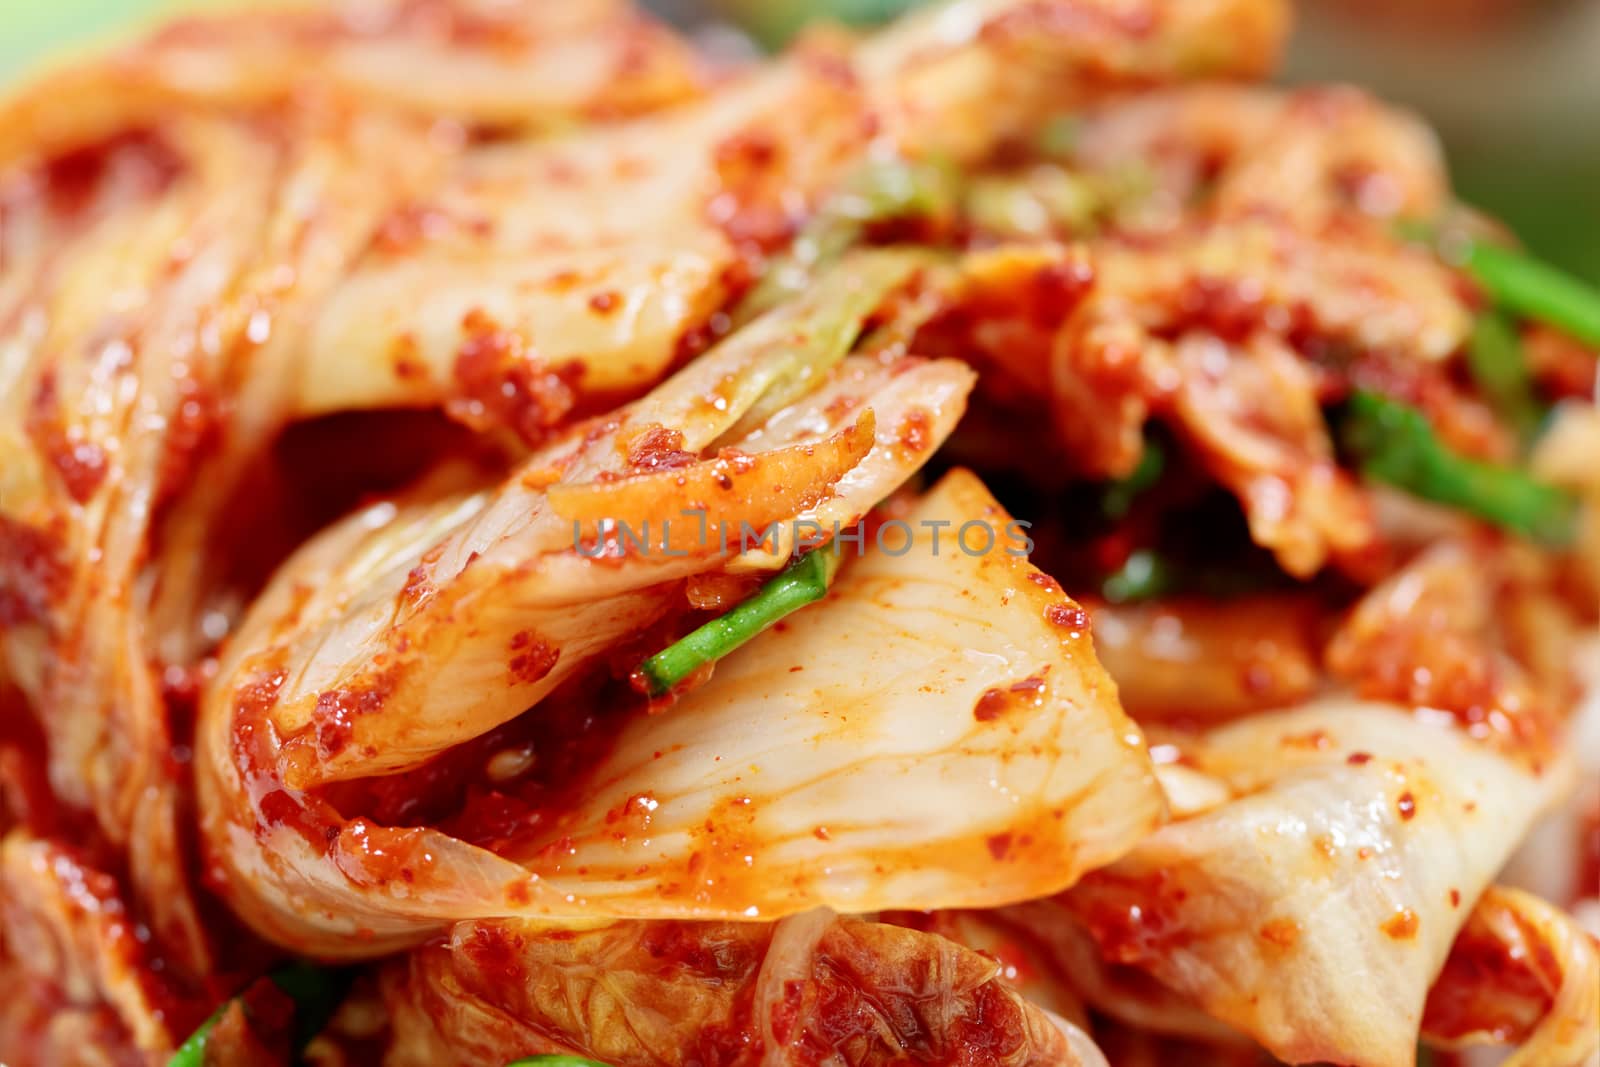 Kimchi (fermented vegetables) with selected focus, filling frame